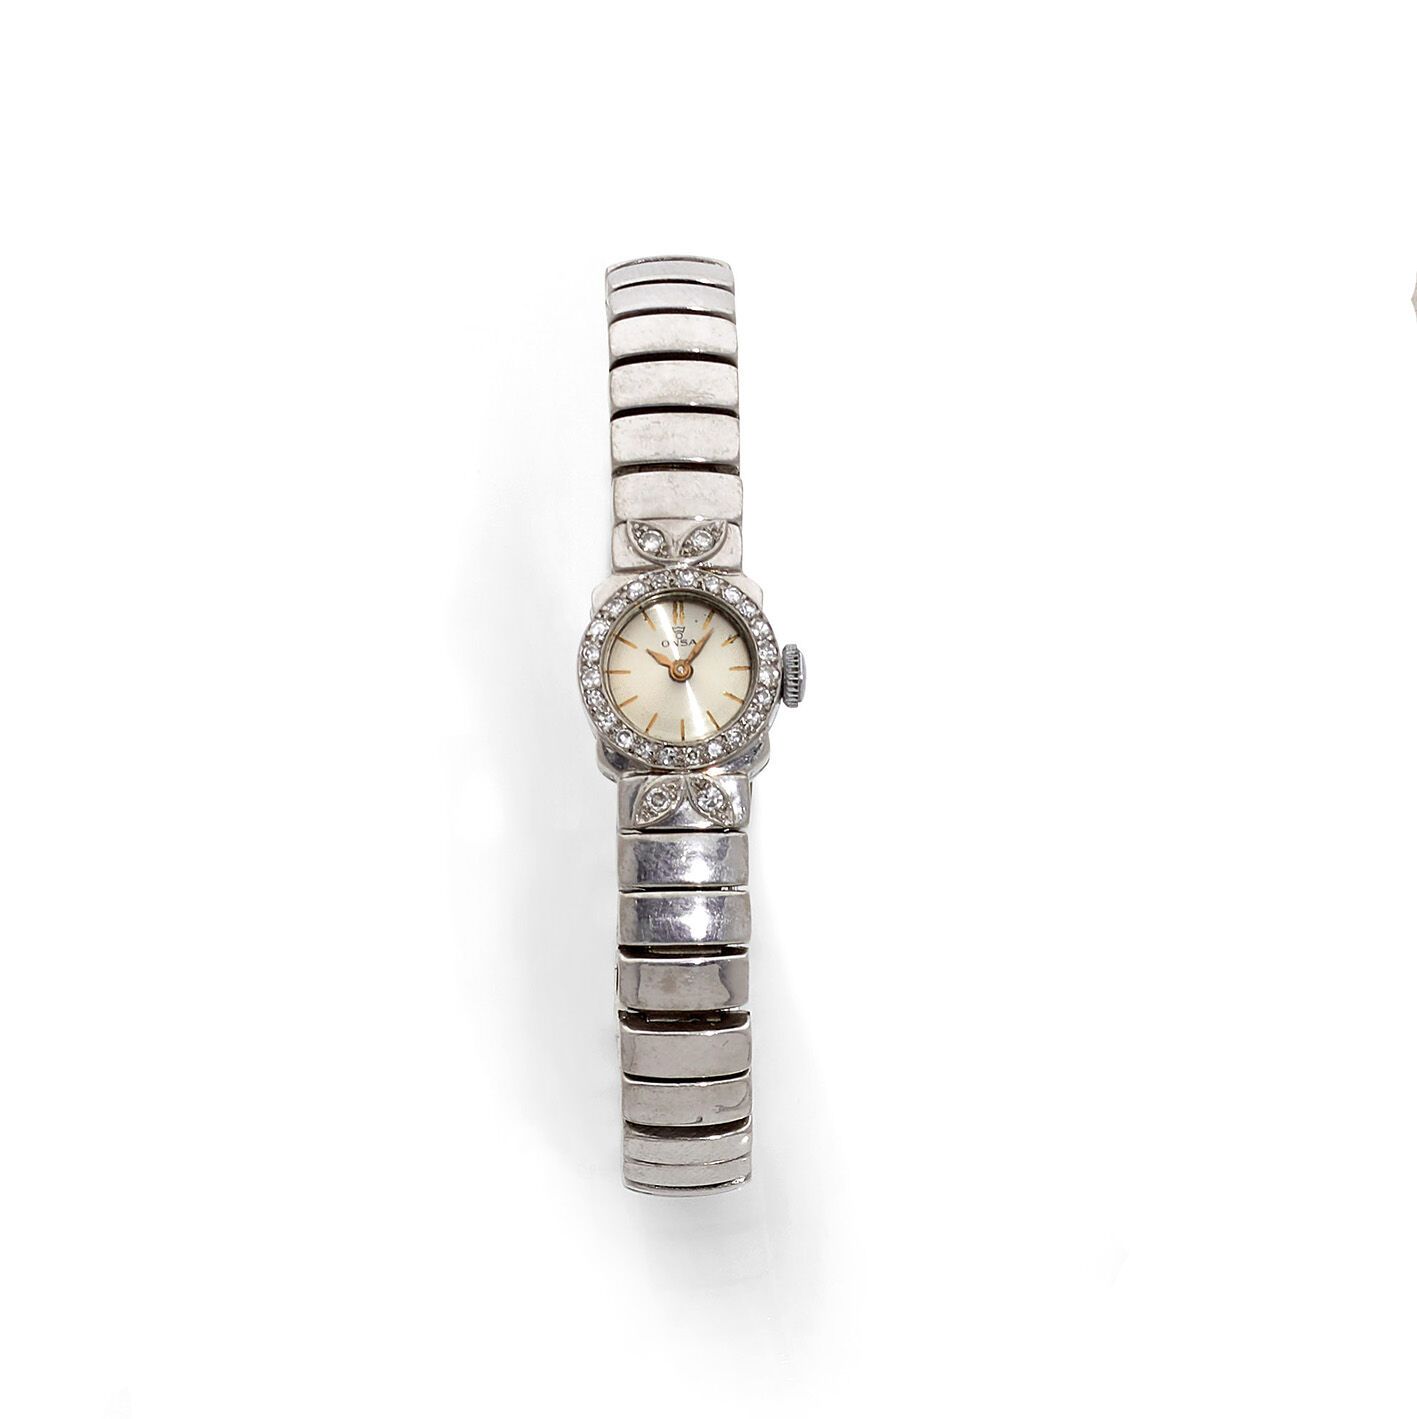 ONSA ONSA
Lady's watch in 18K (750 thousandths) white gold, circa 1950, azure si&hellip;